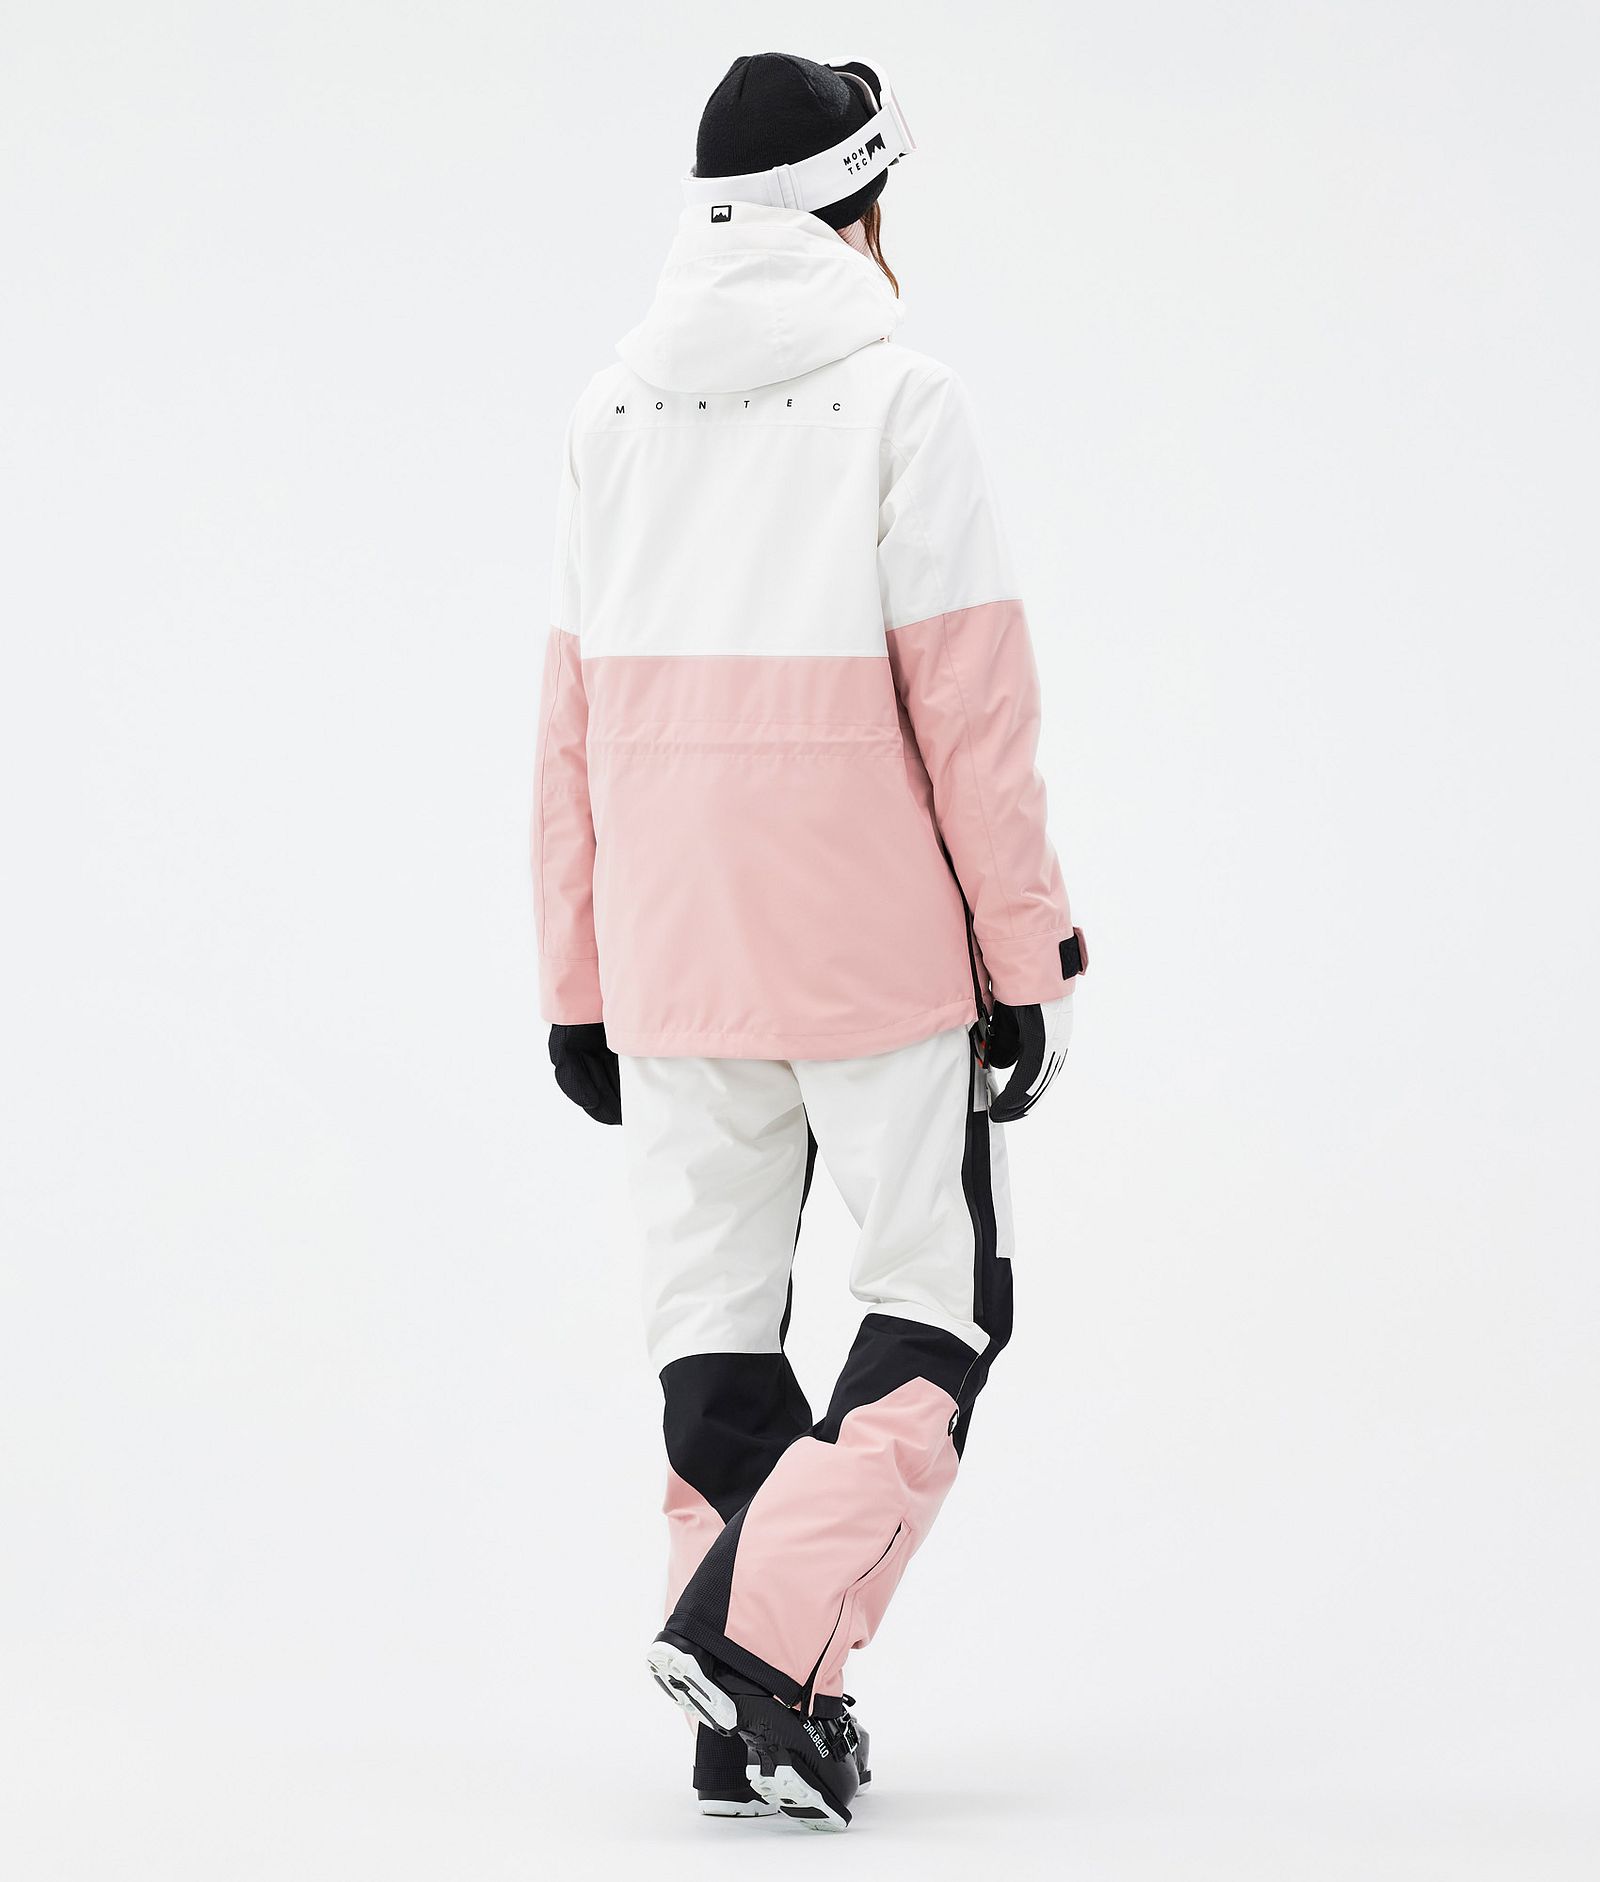 Dune W Outfit Sci Donna Old White/Black/Soft Pink, Image 2 of 2